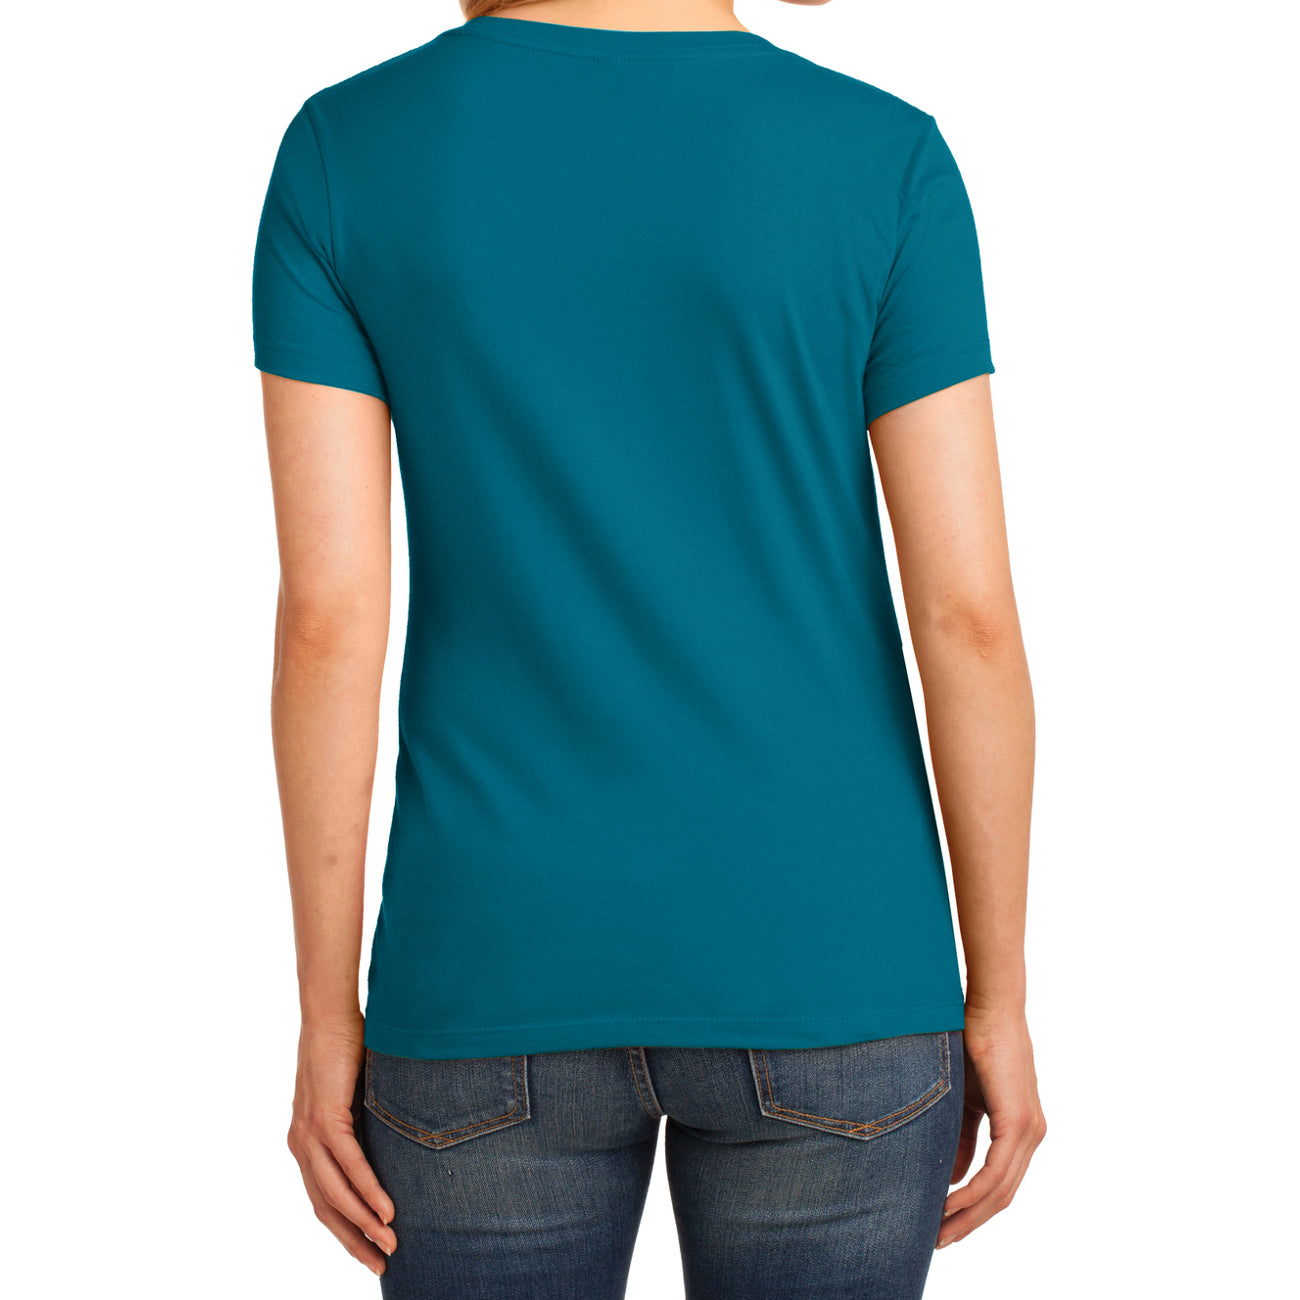 Women's Core Cotton V-Neck Tee - Teal - Back